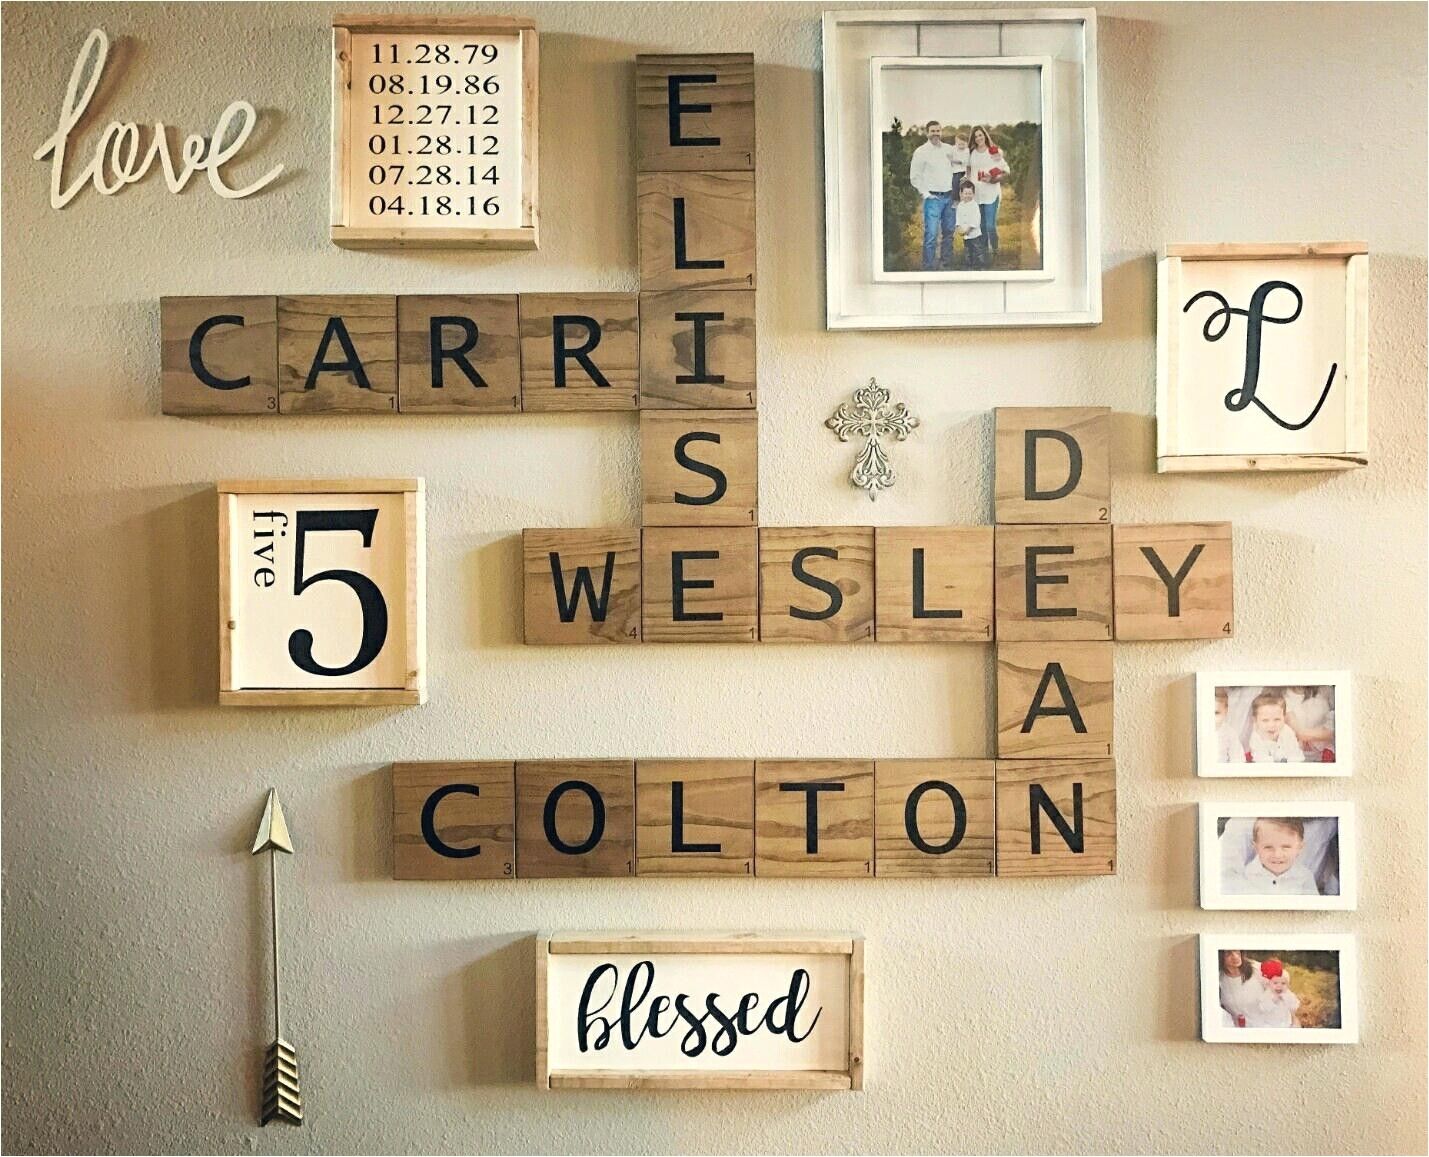 Large Free Standing Letters For Decorating Wall Decor Metal Letter Intended For Letter Wall Art (Photo 15 of 20)